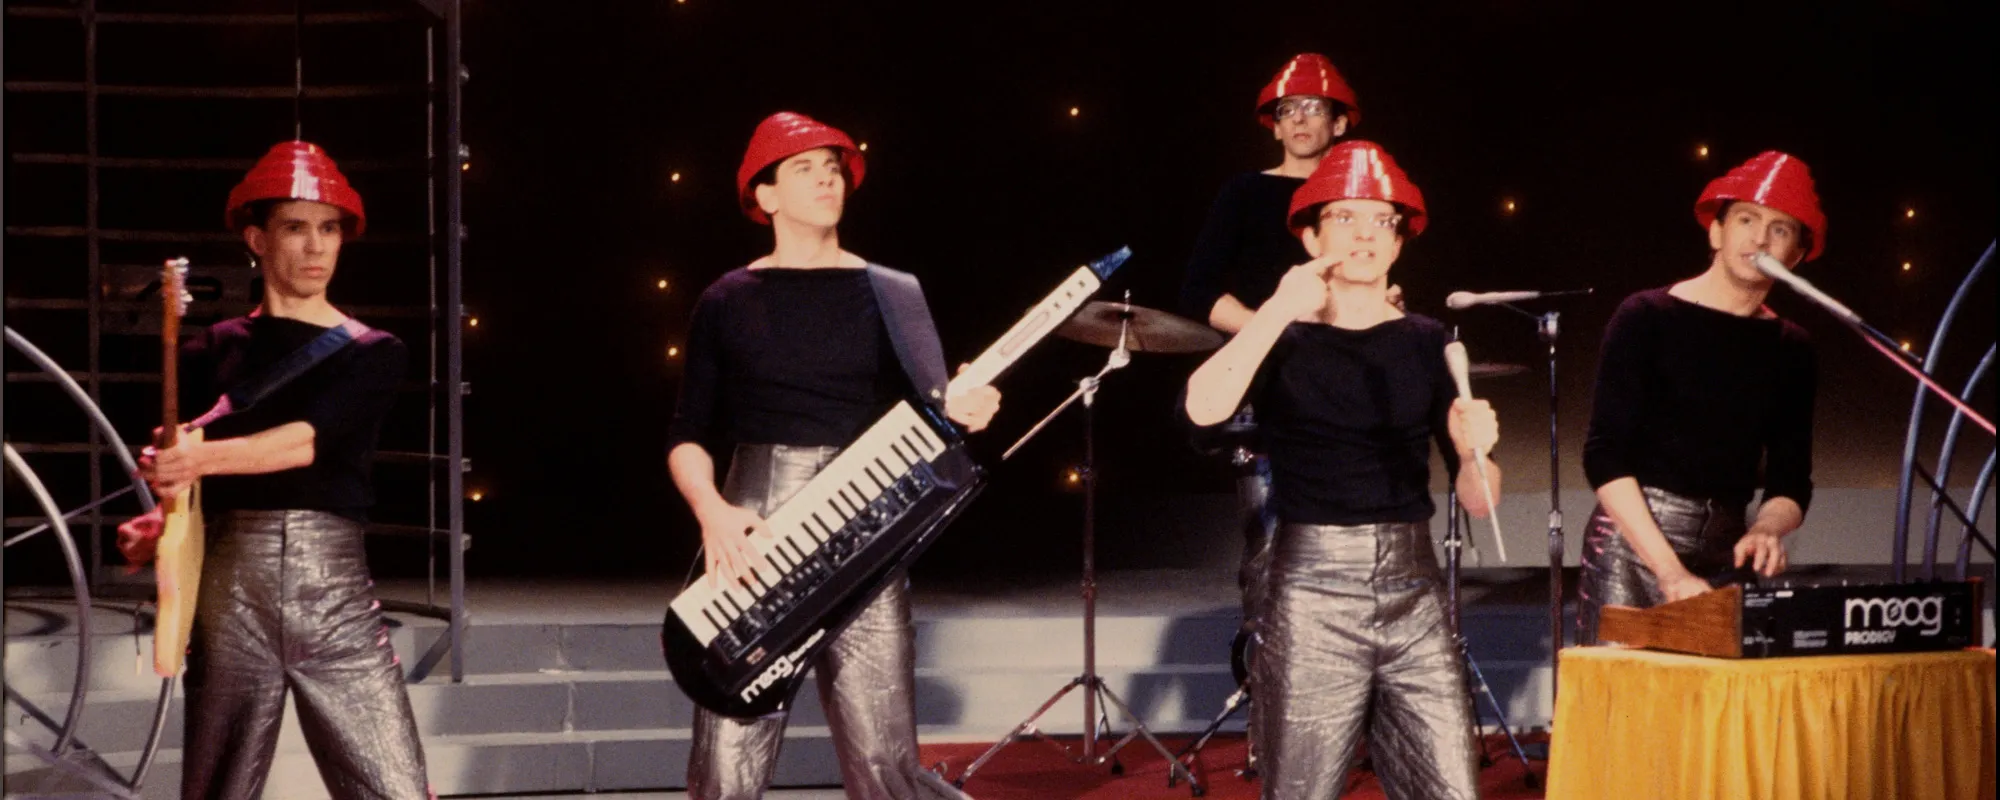 DEVO to Retire from Touring: “It’s Tricky Being in a Band”